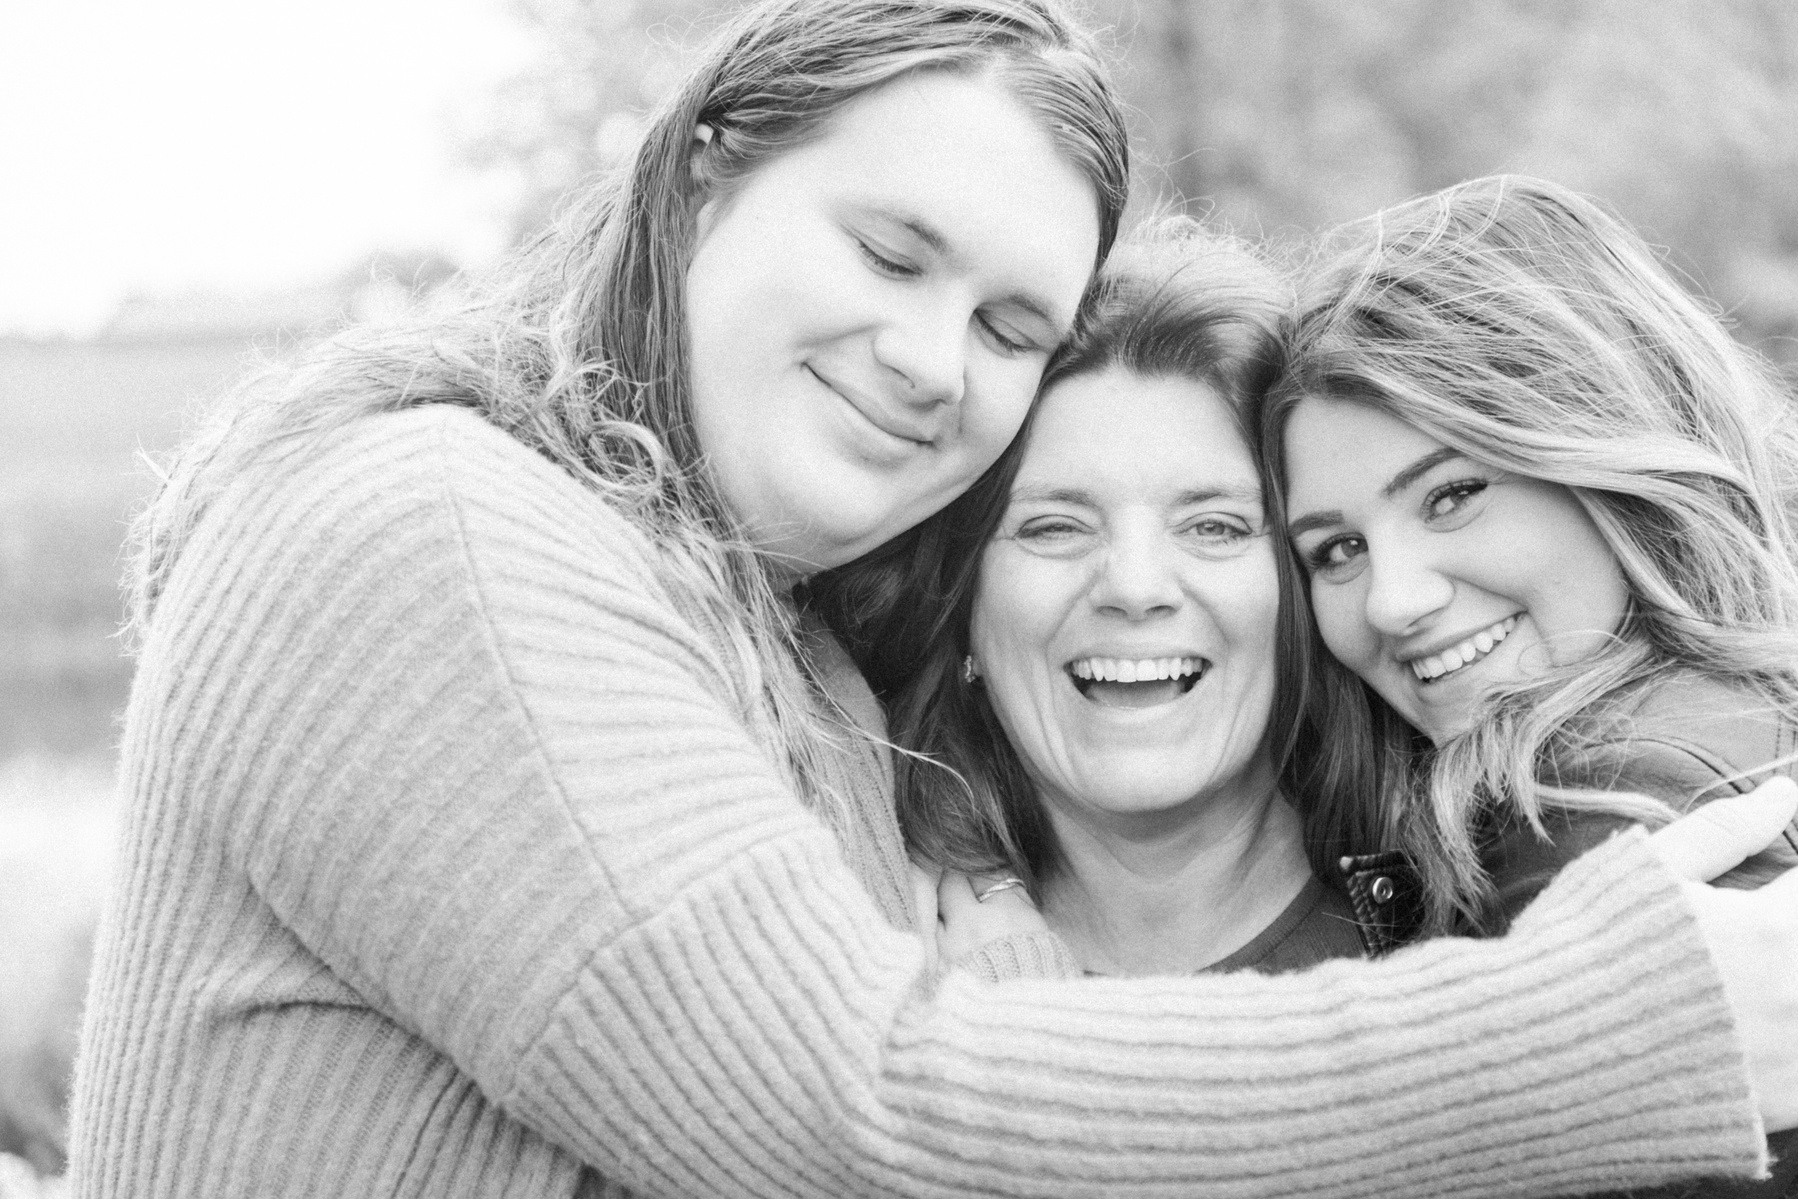 Black and white family photo of two sisters hugging mother, L'Orignal family photographer, Champlain family photographer, Hawkesbury family photographer, Quebec family photography, Vaudreuil-Soulanges Photographer, Emily VanderBeek Photography.